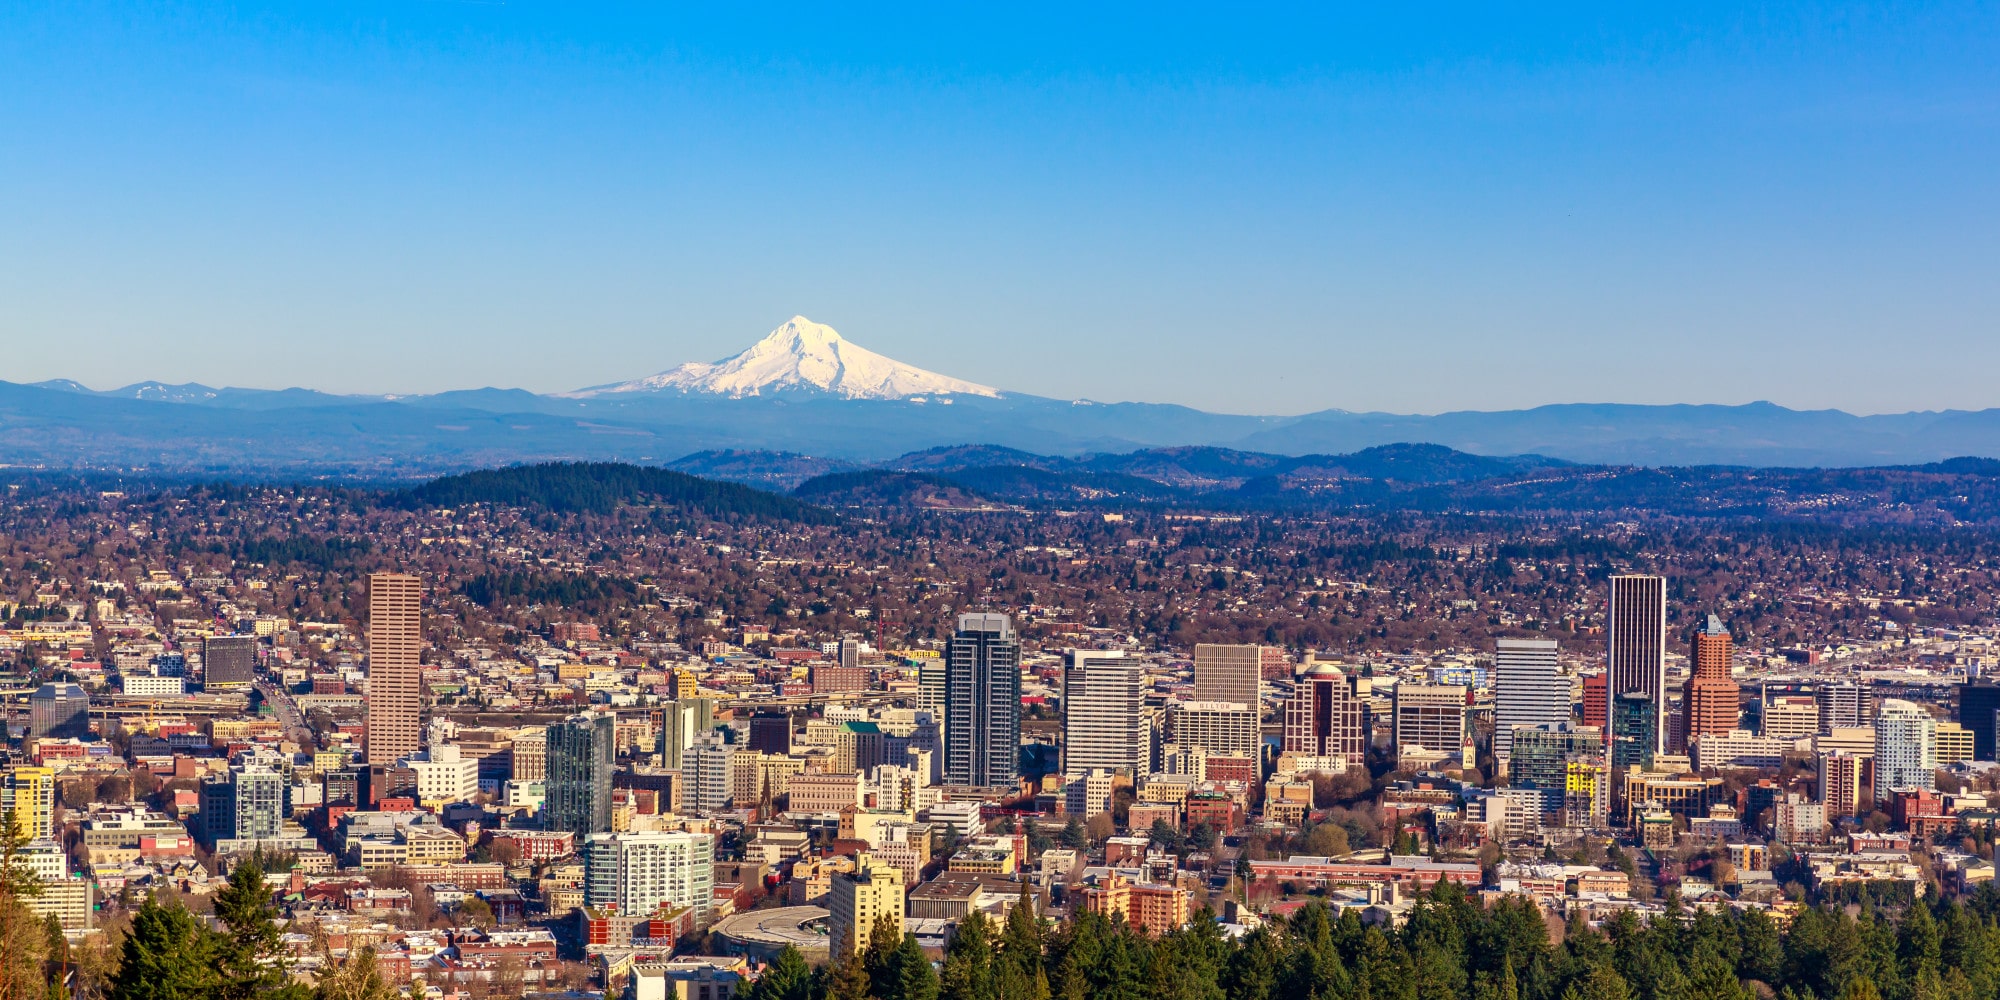 Why Should You Hire Property Management in Portland?